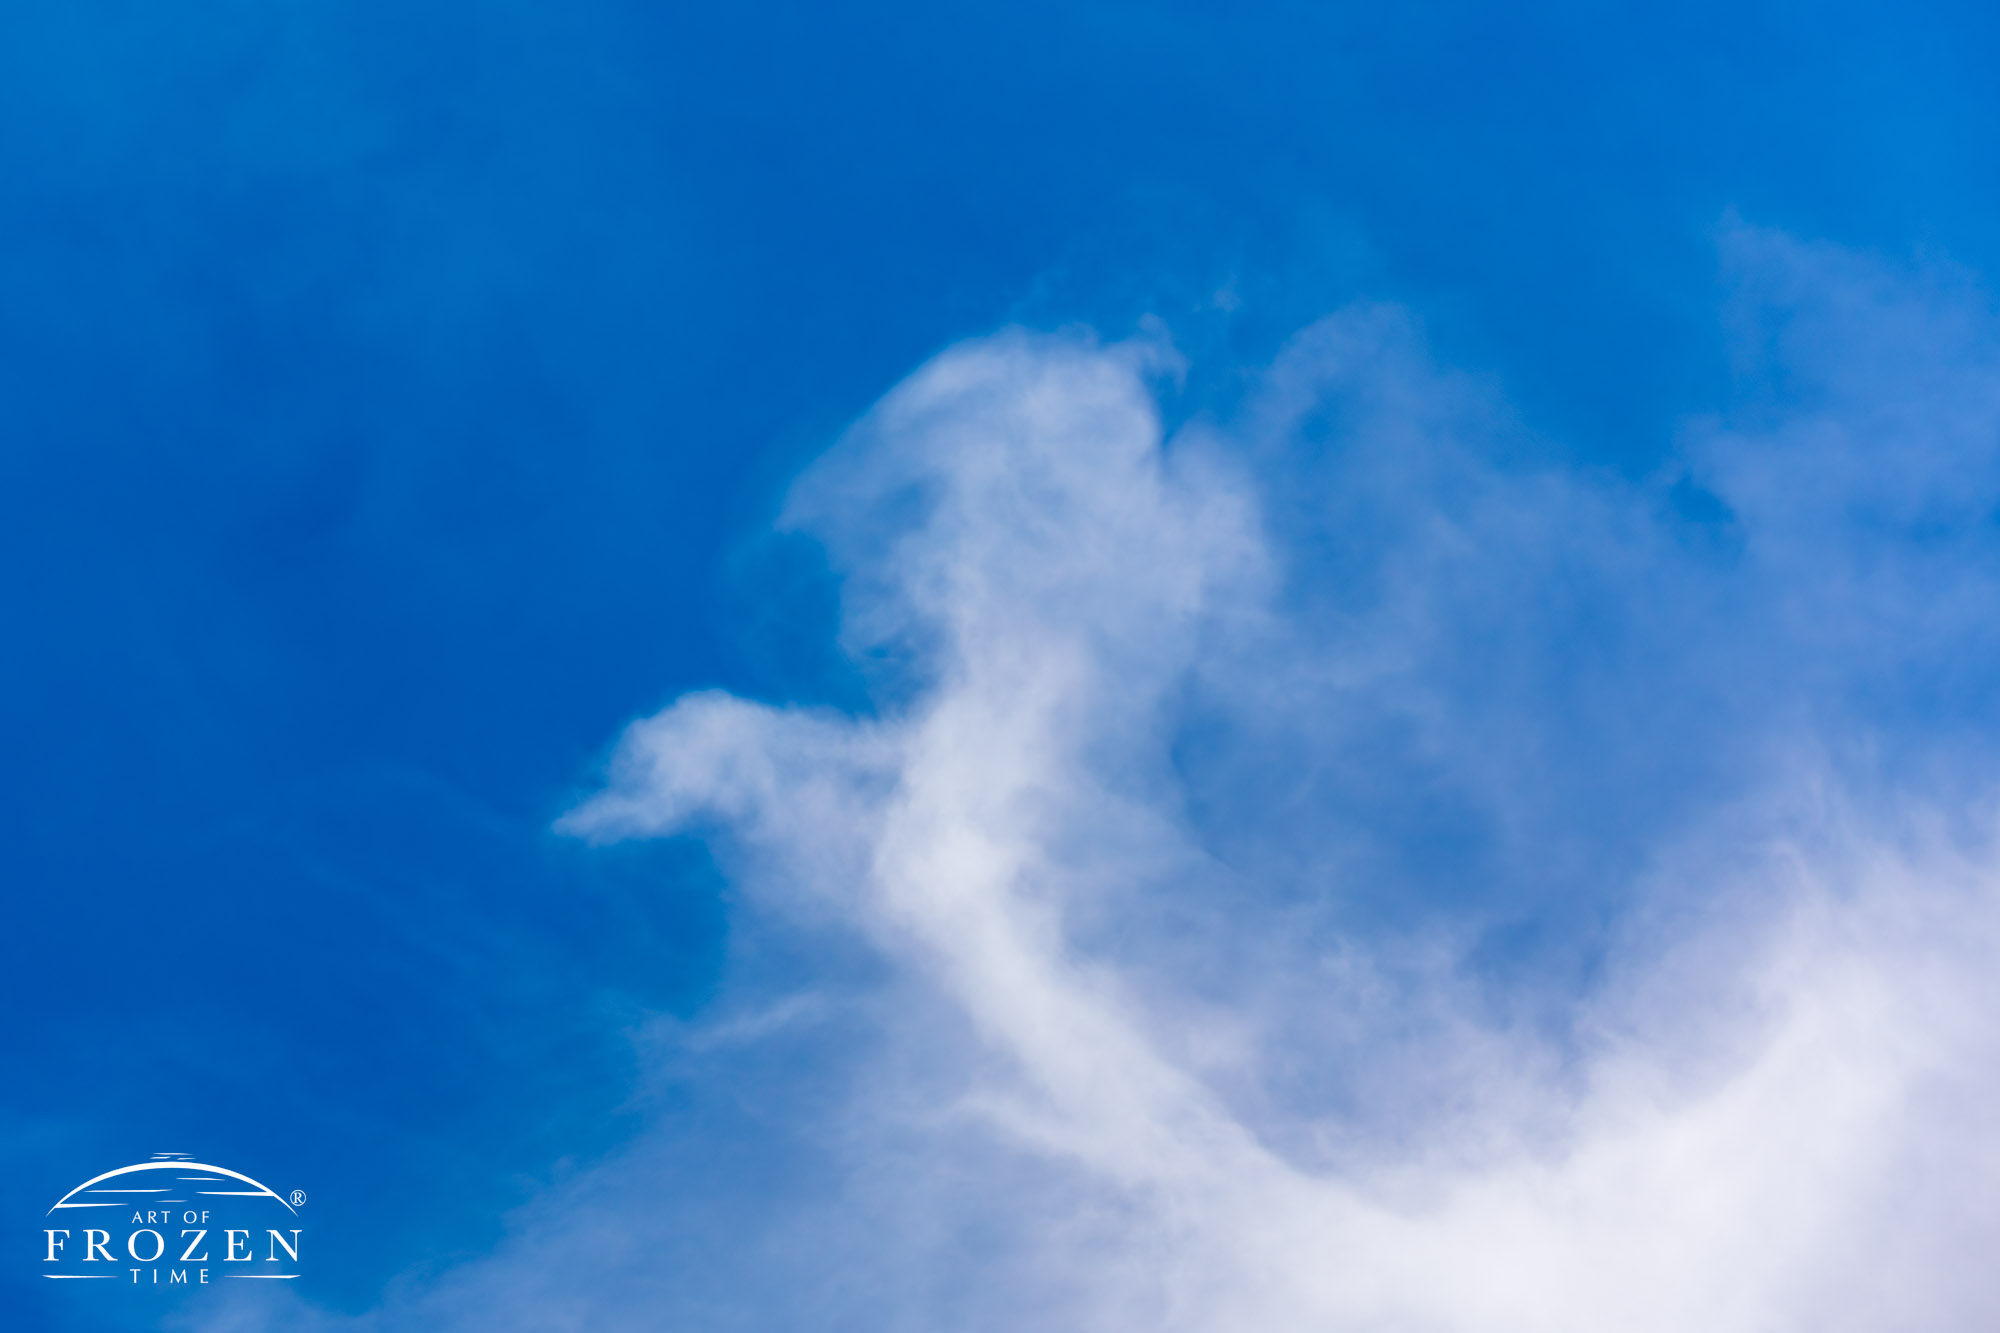 A telephoto view of a cirrus clouds which formed an interesting shape against the blue sky.